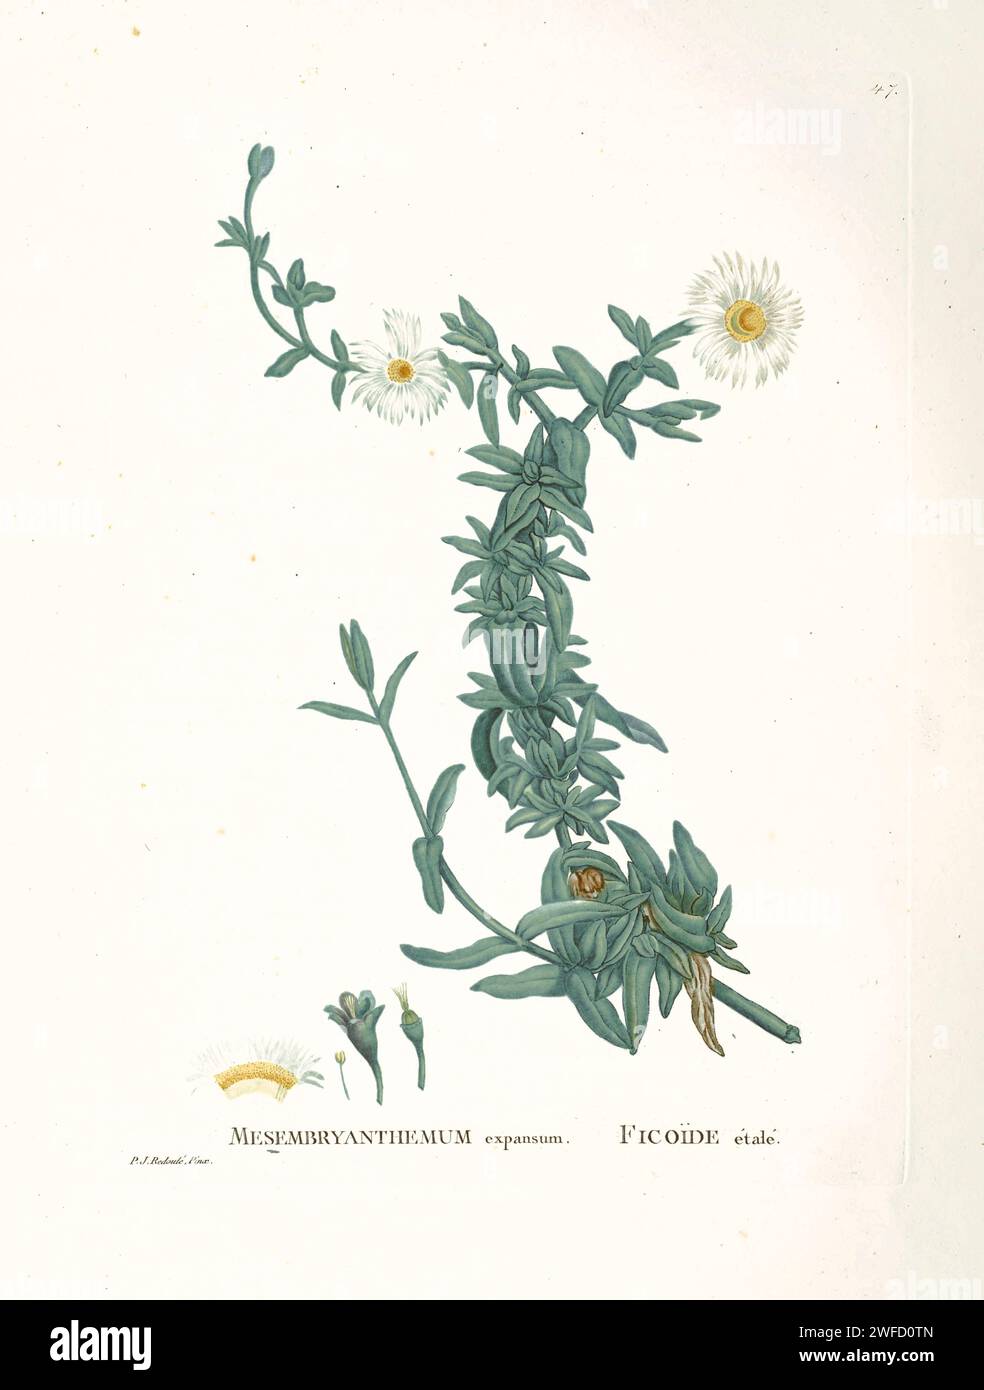 Prenia pallens Here As Mesembryanthemum expansum from History of Succulent Plants [Plantarum historia succulentarum / Histoire des plantes grasses] painted by Pierre-Joseph Redouté and described by Augustin Pyramus de Candolle Stock Photo